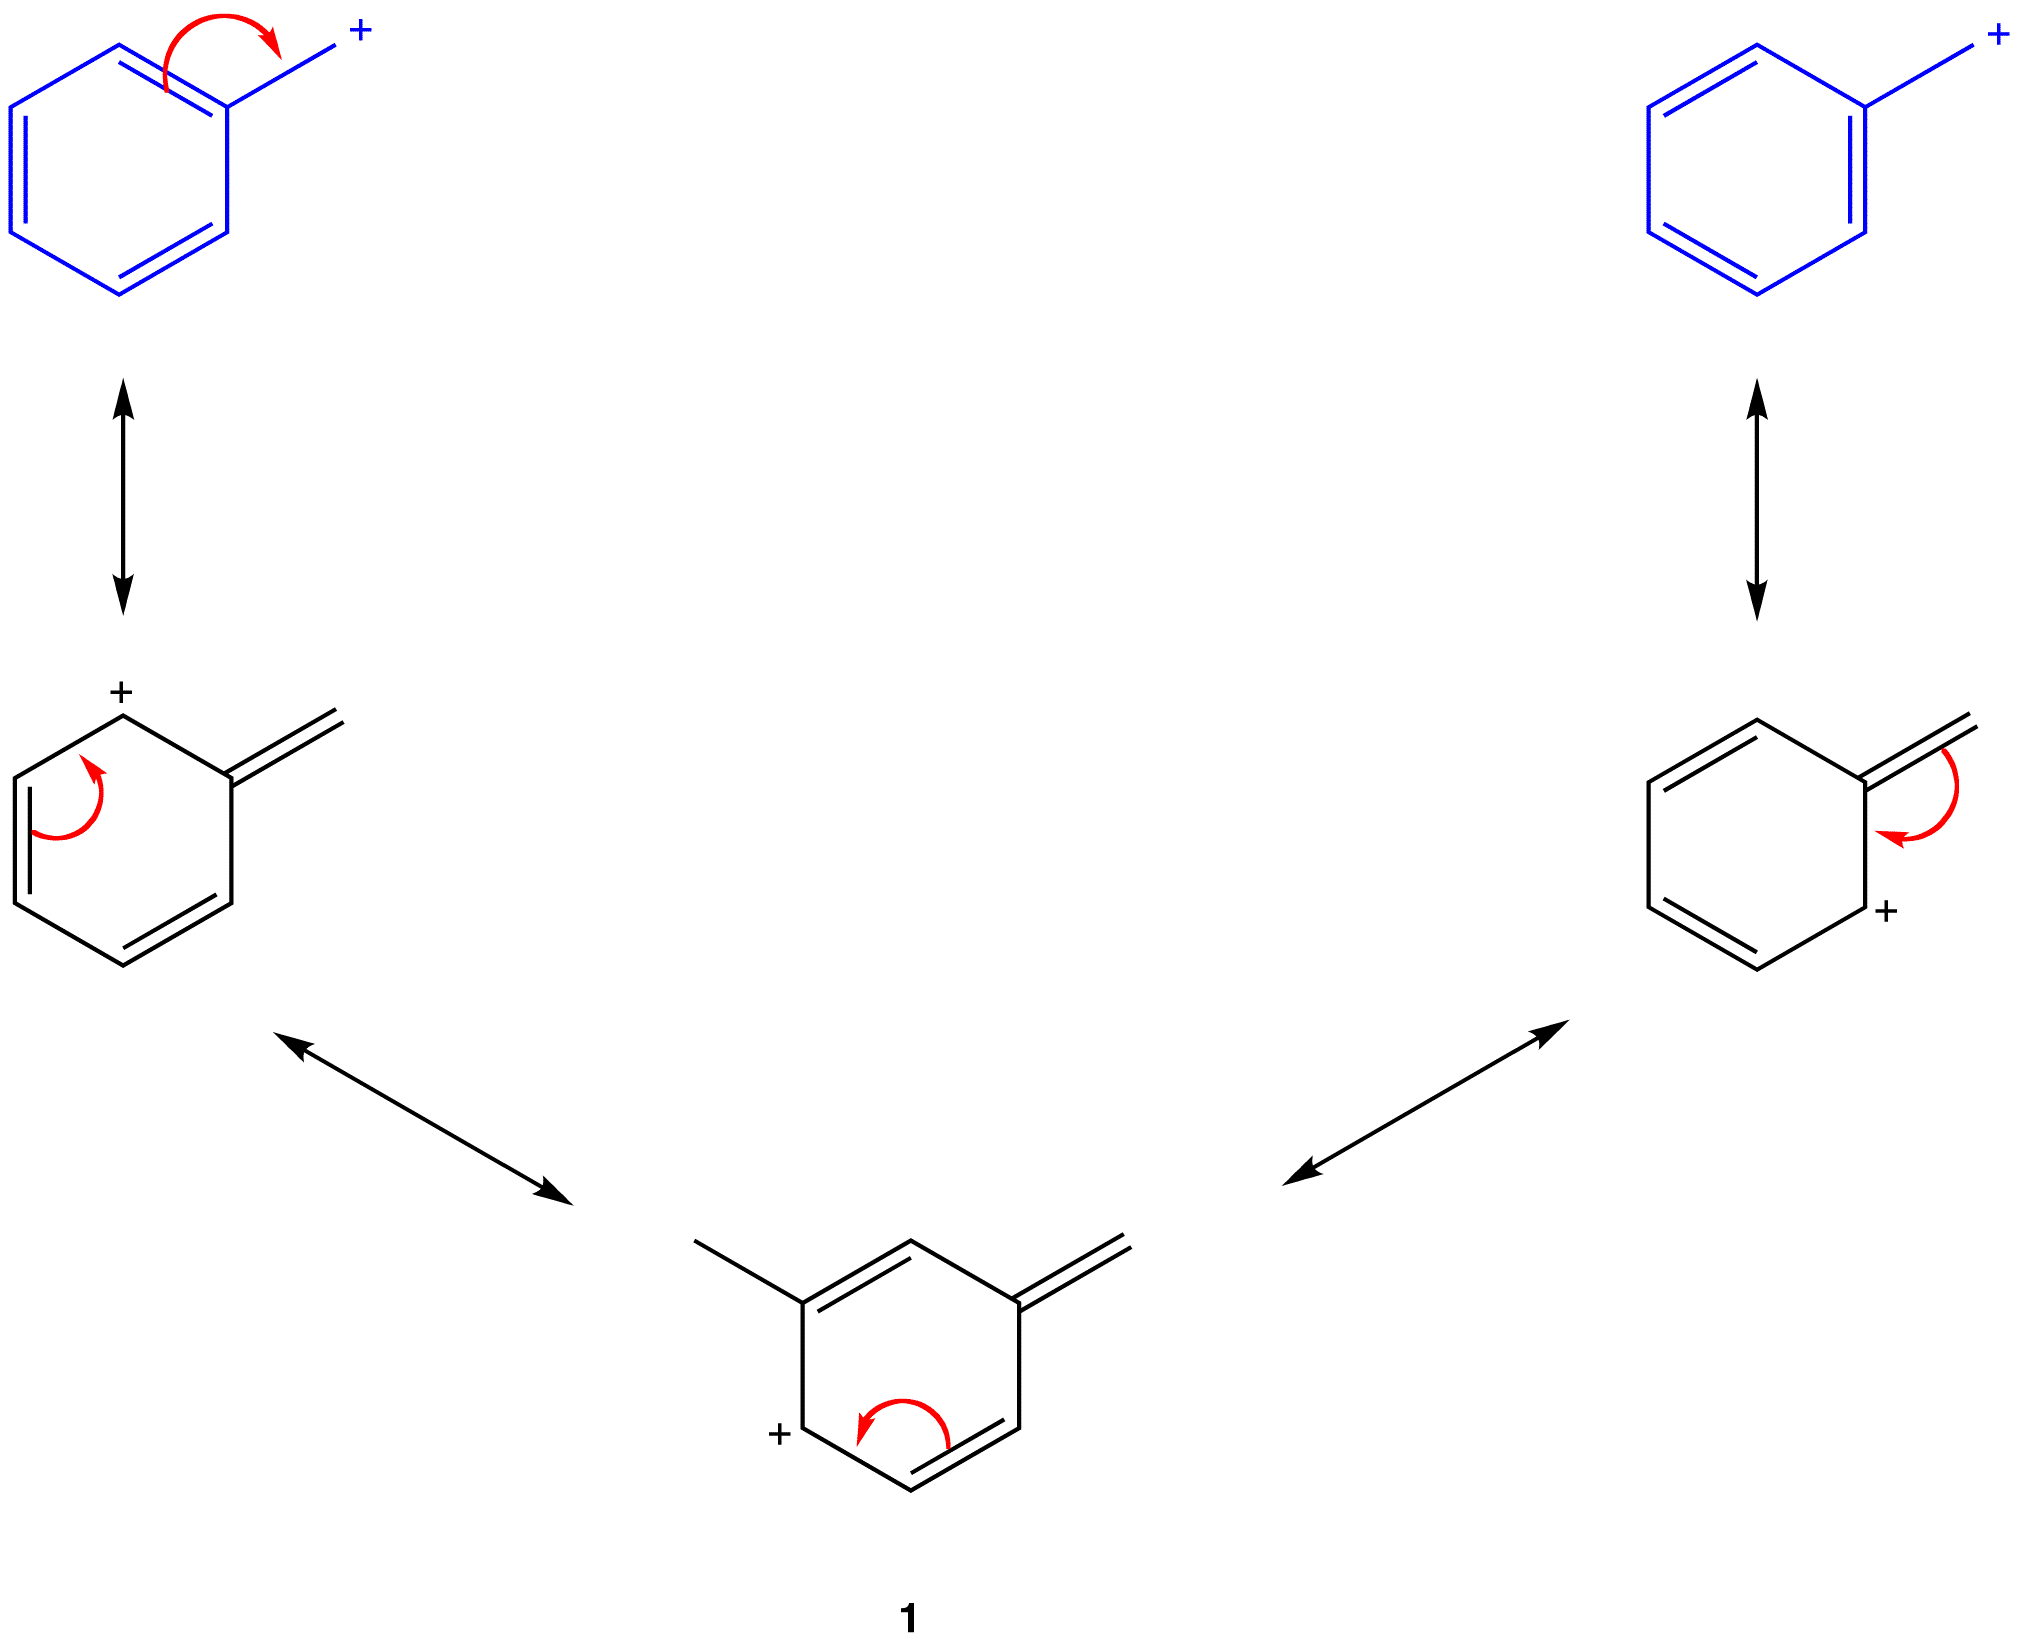 benzyliccarbocation2.png